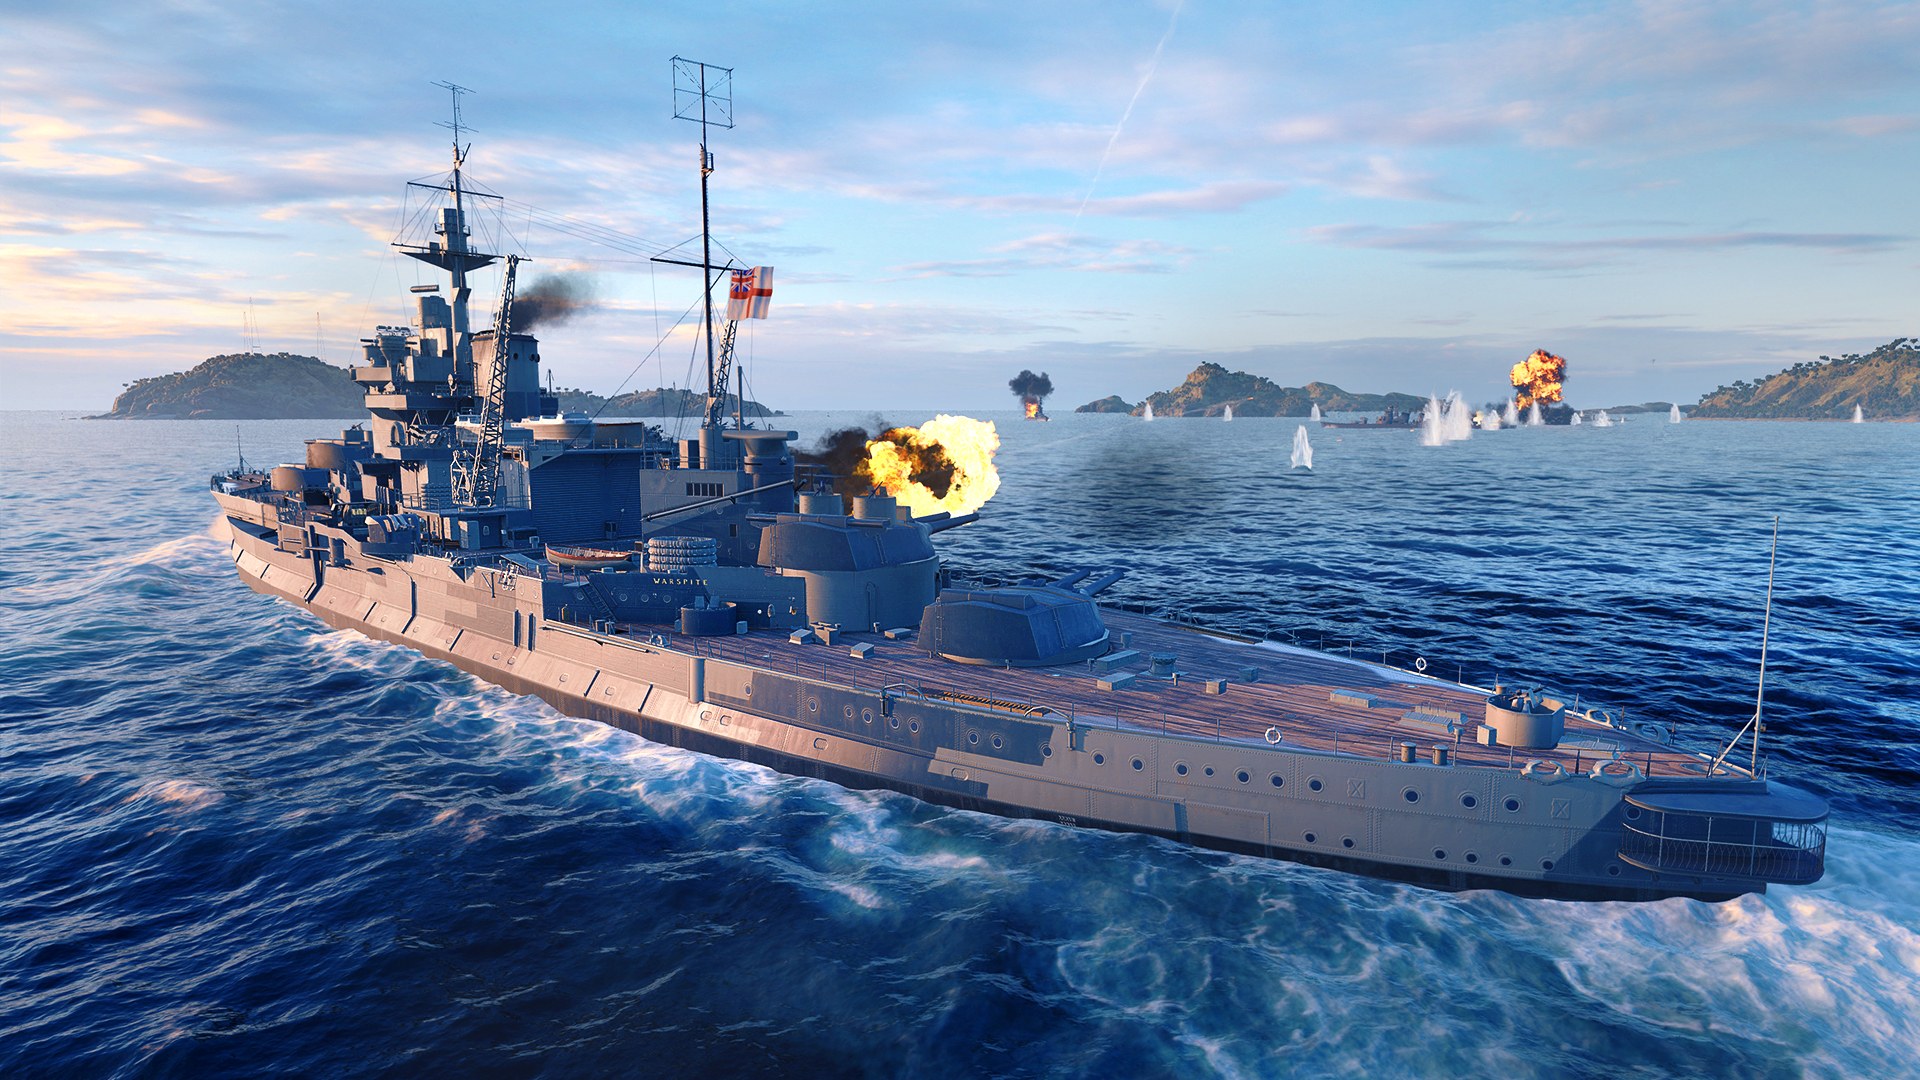 world of warships legends ps4 submarines